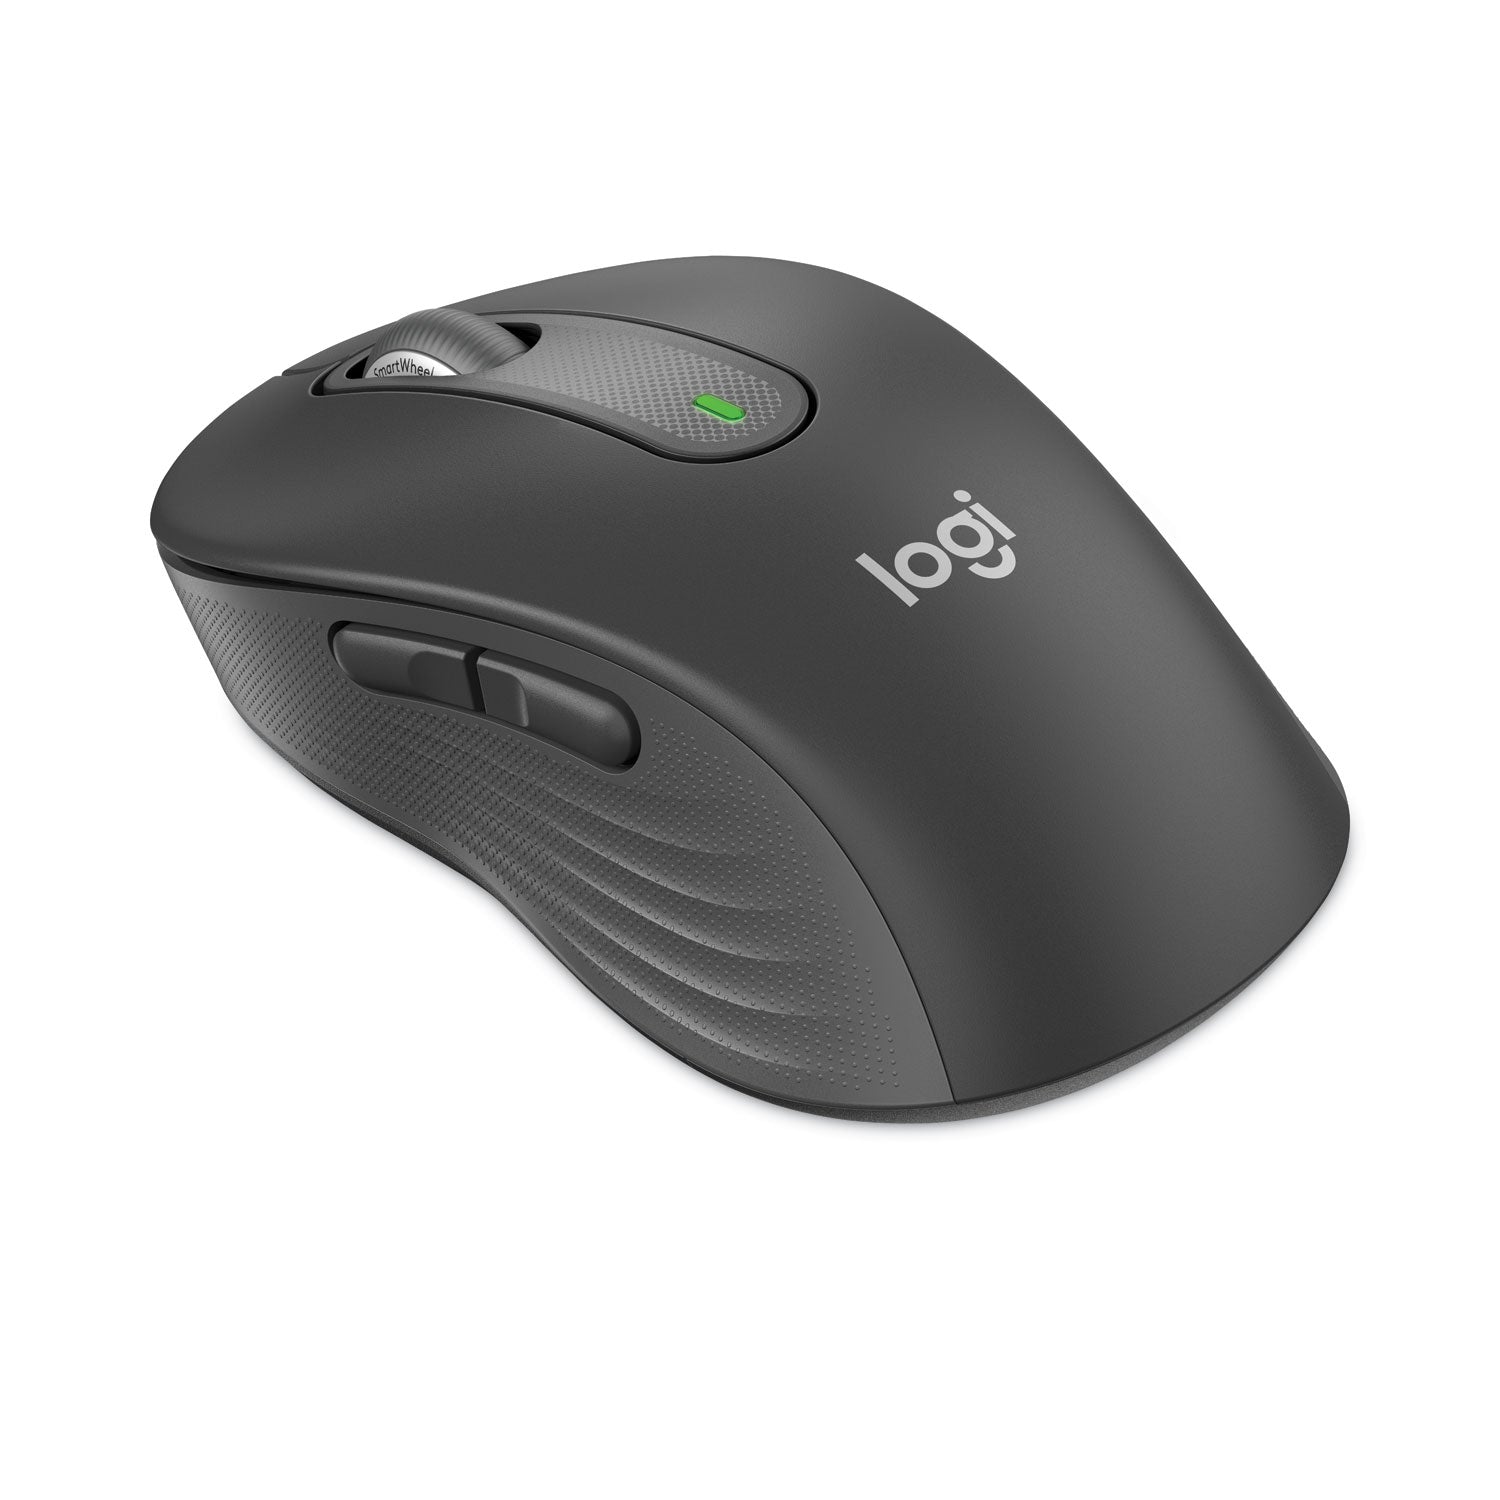 signature-m650-for-business-wireless-mouse-large-24-ghz-frequency-33-ft-wireless-range-right-hand-use-graphite_log910006346 - 2